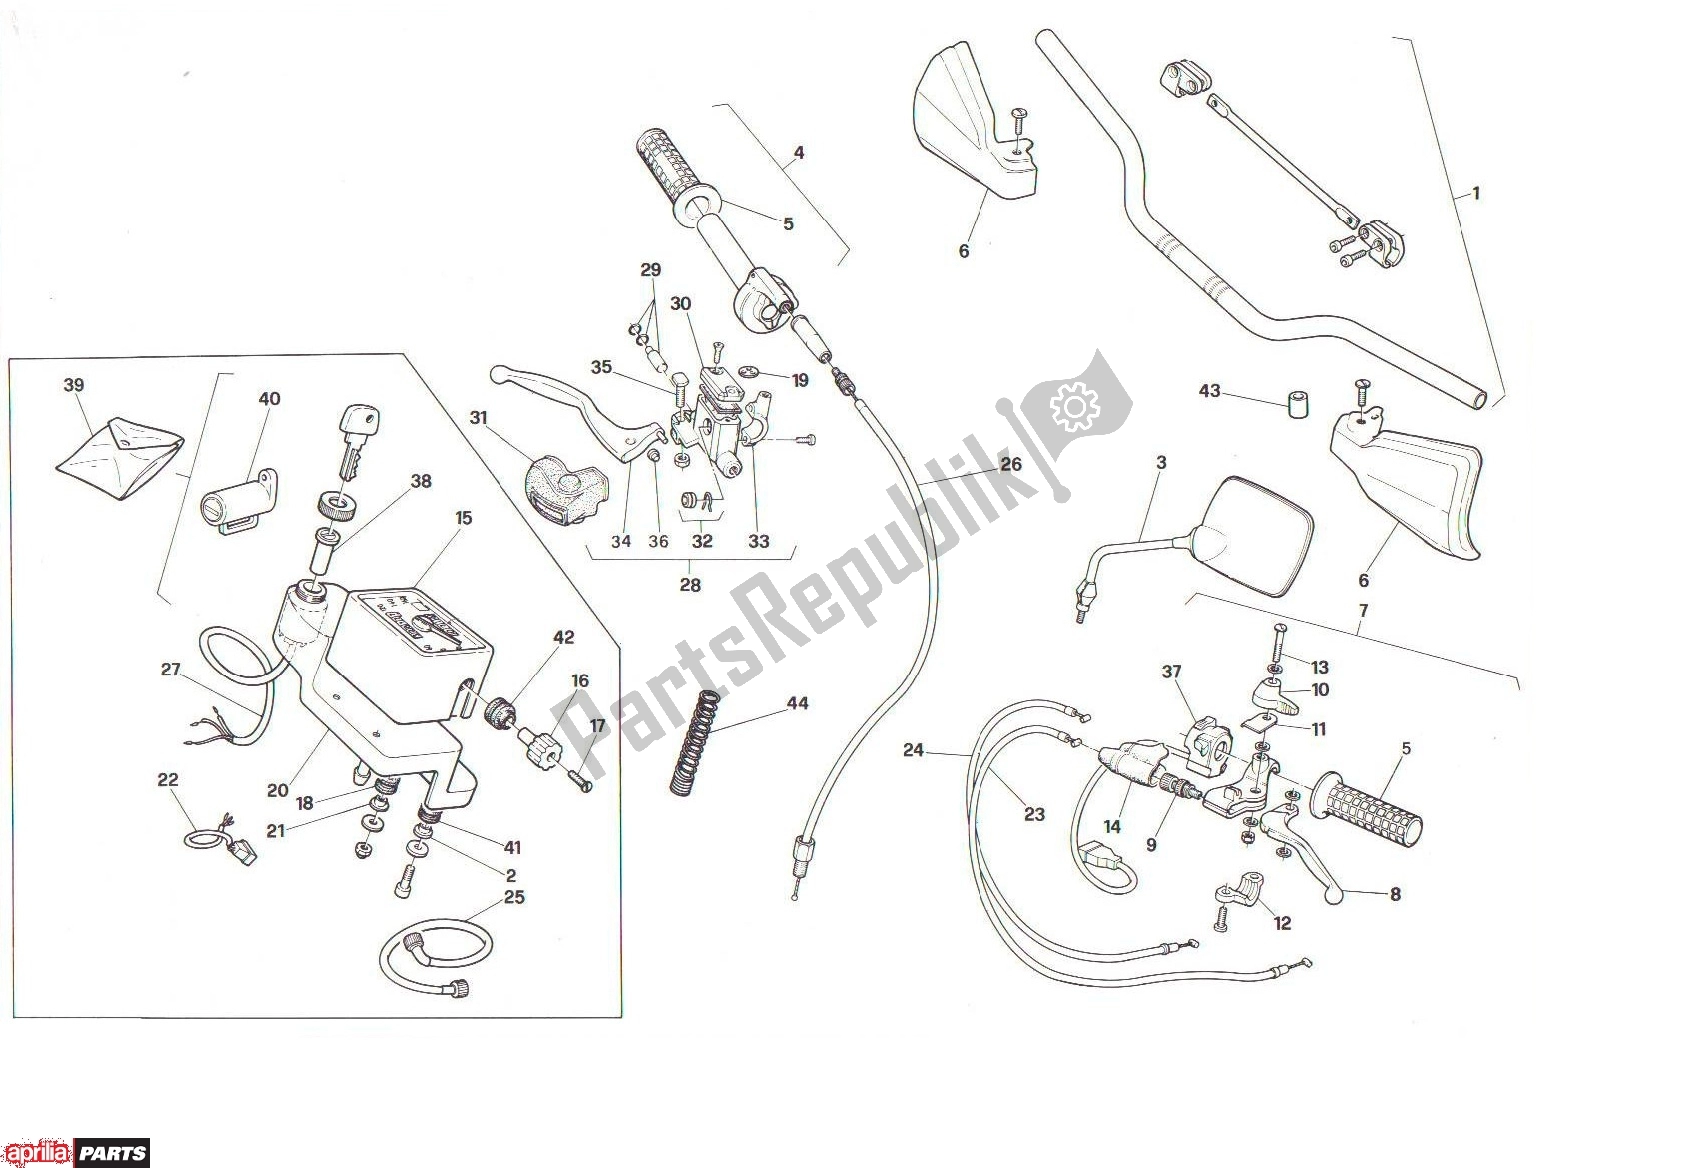 All parts for the Handle Bars of the Aprilia RX 104 125 1991